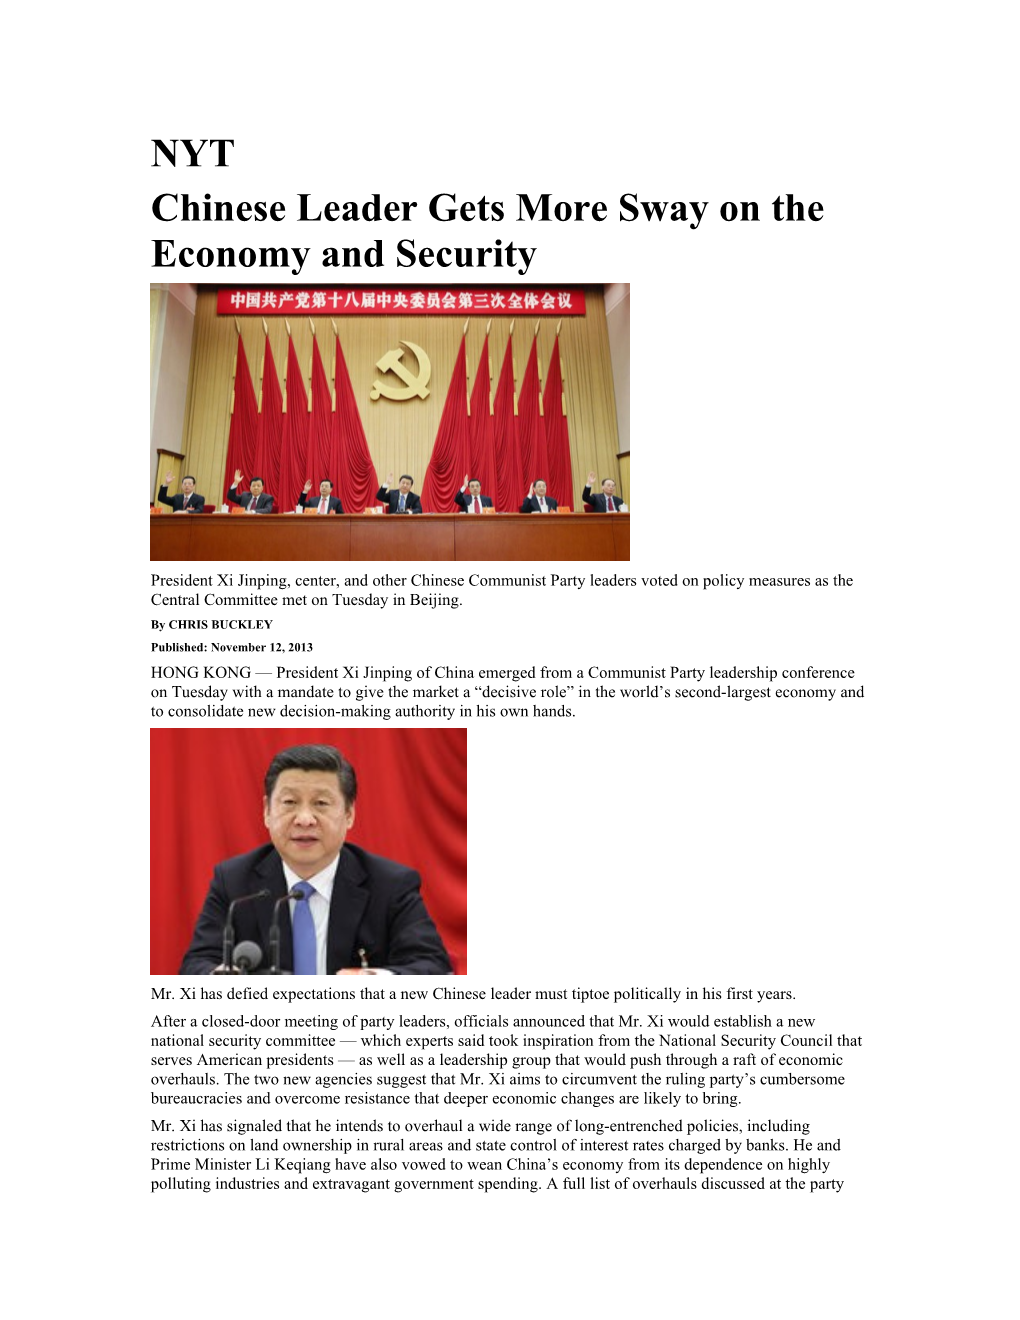 Chinese Leader Gets More Sway on the Economy and Security